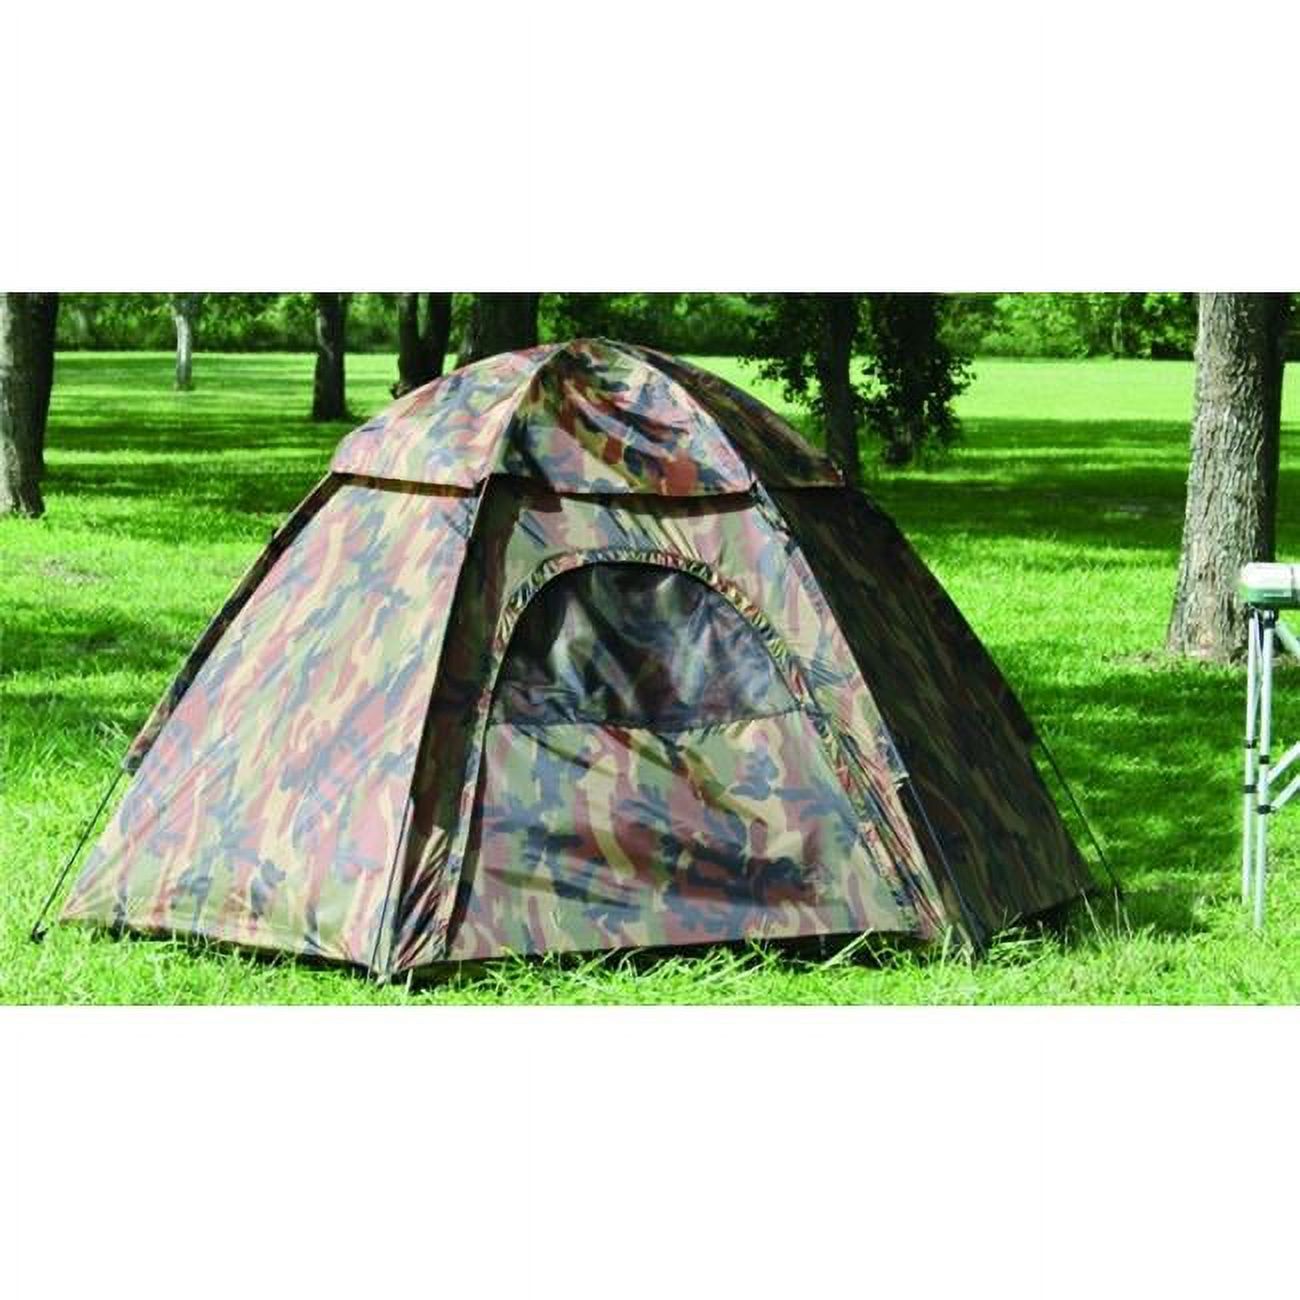 Texsport 01113 Camouflage Three-Person Hexagon Dome Tent - image 1 of 1